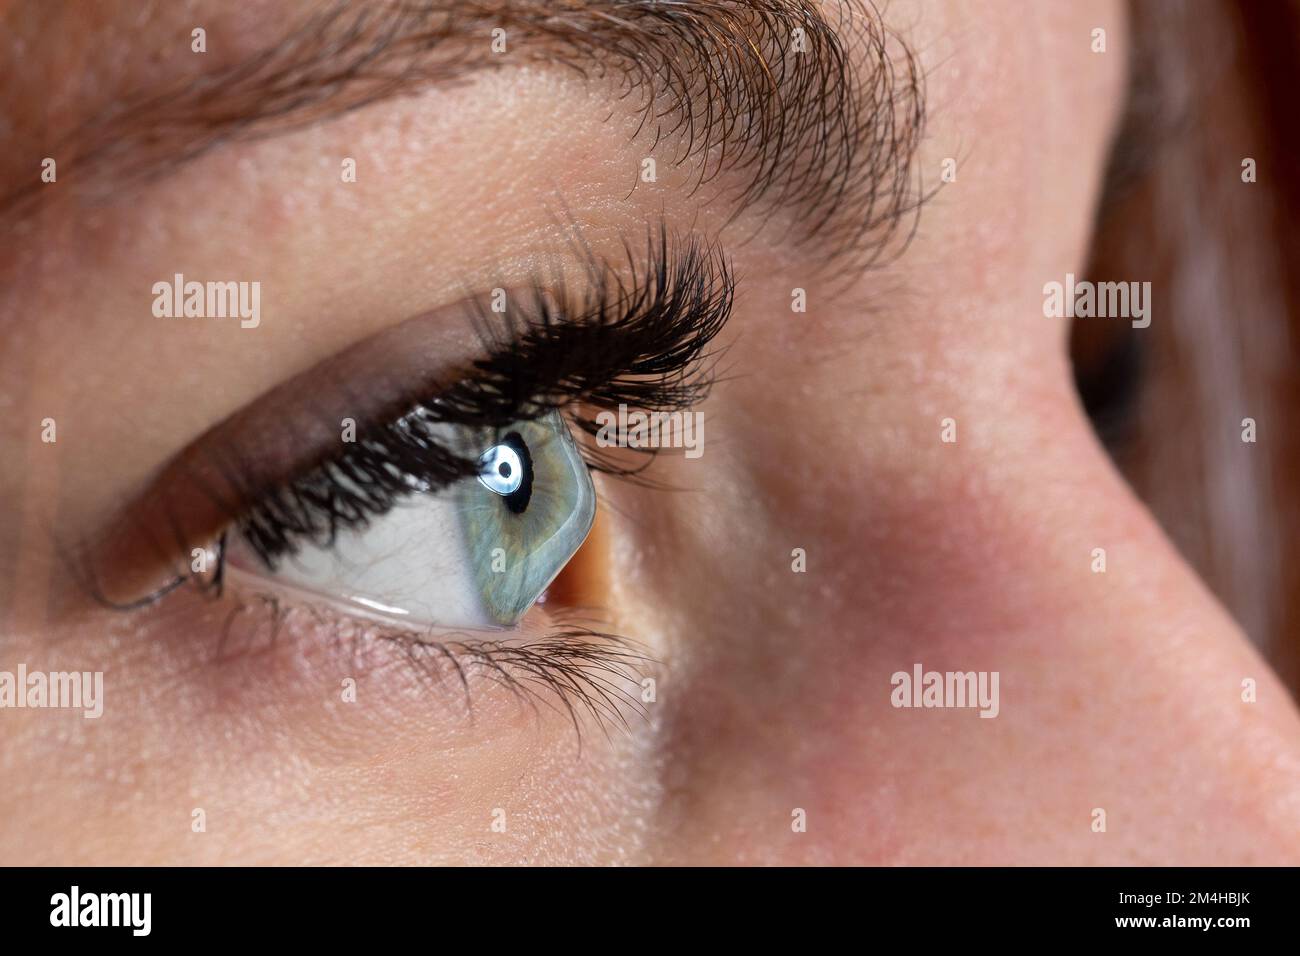 Human eye of a woman affected by keratoconus, or conical cornea. Vision pathology leading to myopia and astigmatism and severe visual aberrations. Tre Stock Photo